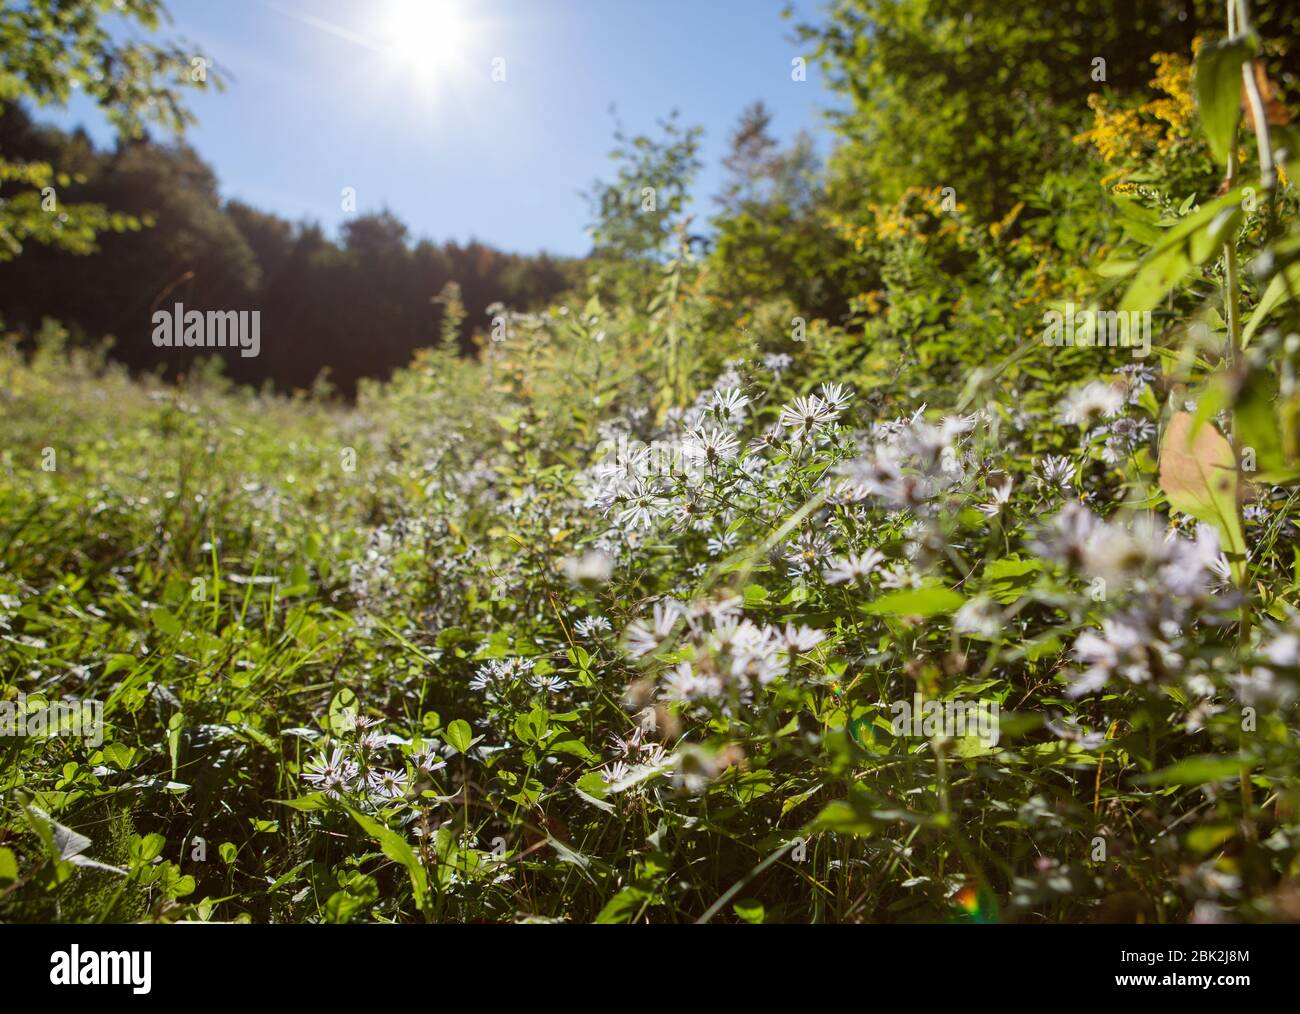 American aster (Symphyotrichum) flowers are illuminated by a bright sun on the edge of a clearing in Hammond Hill State Park, Dryden, NY, USA Stock Photo